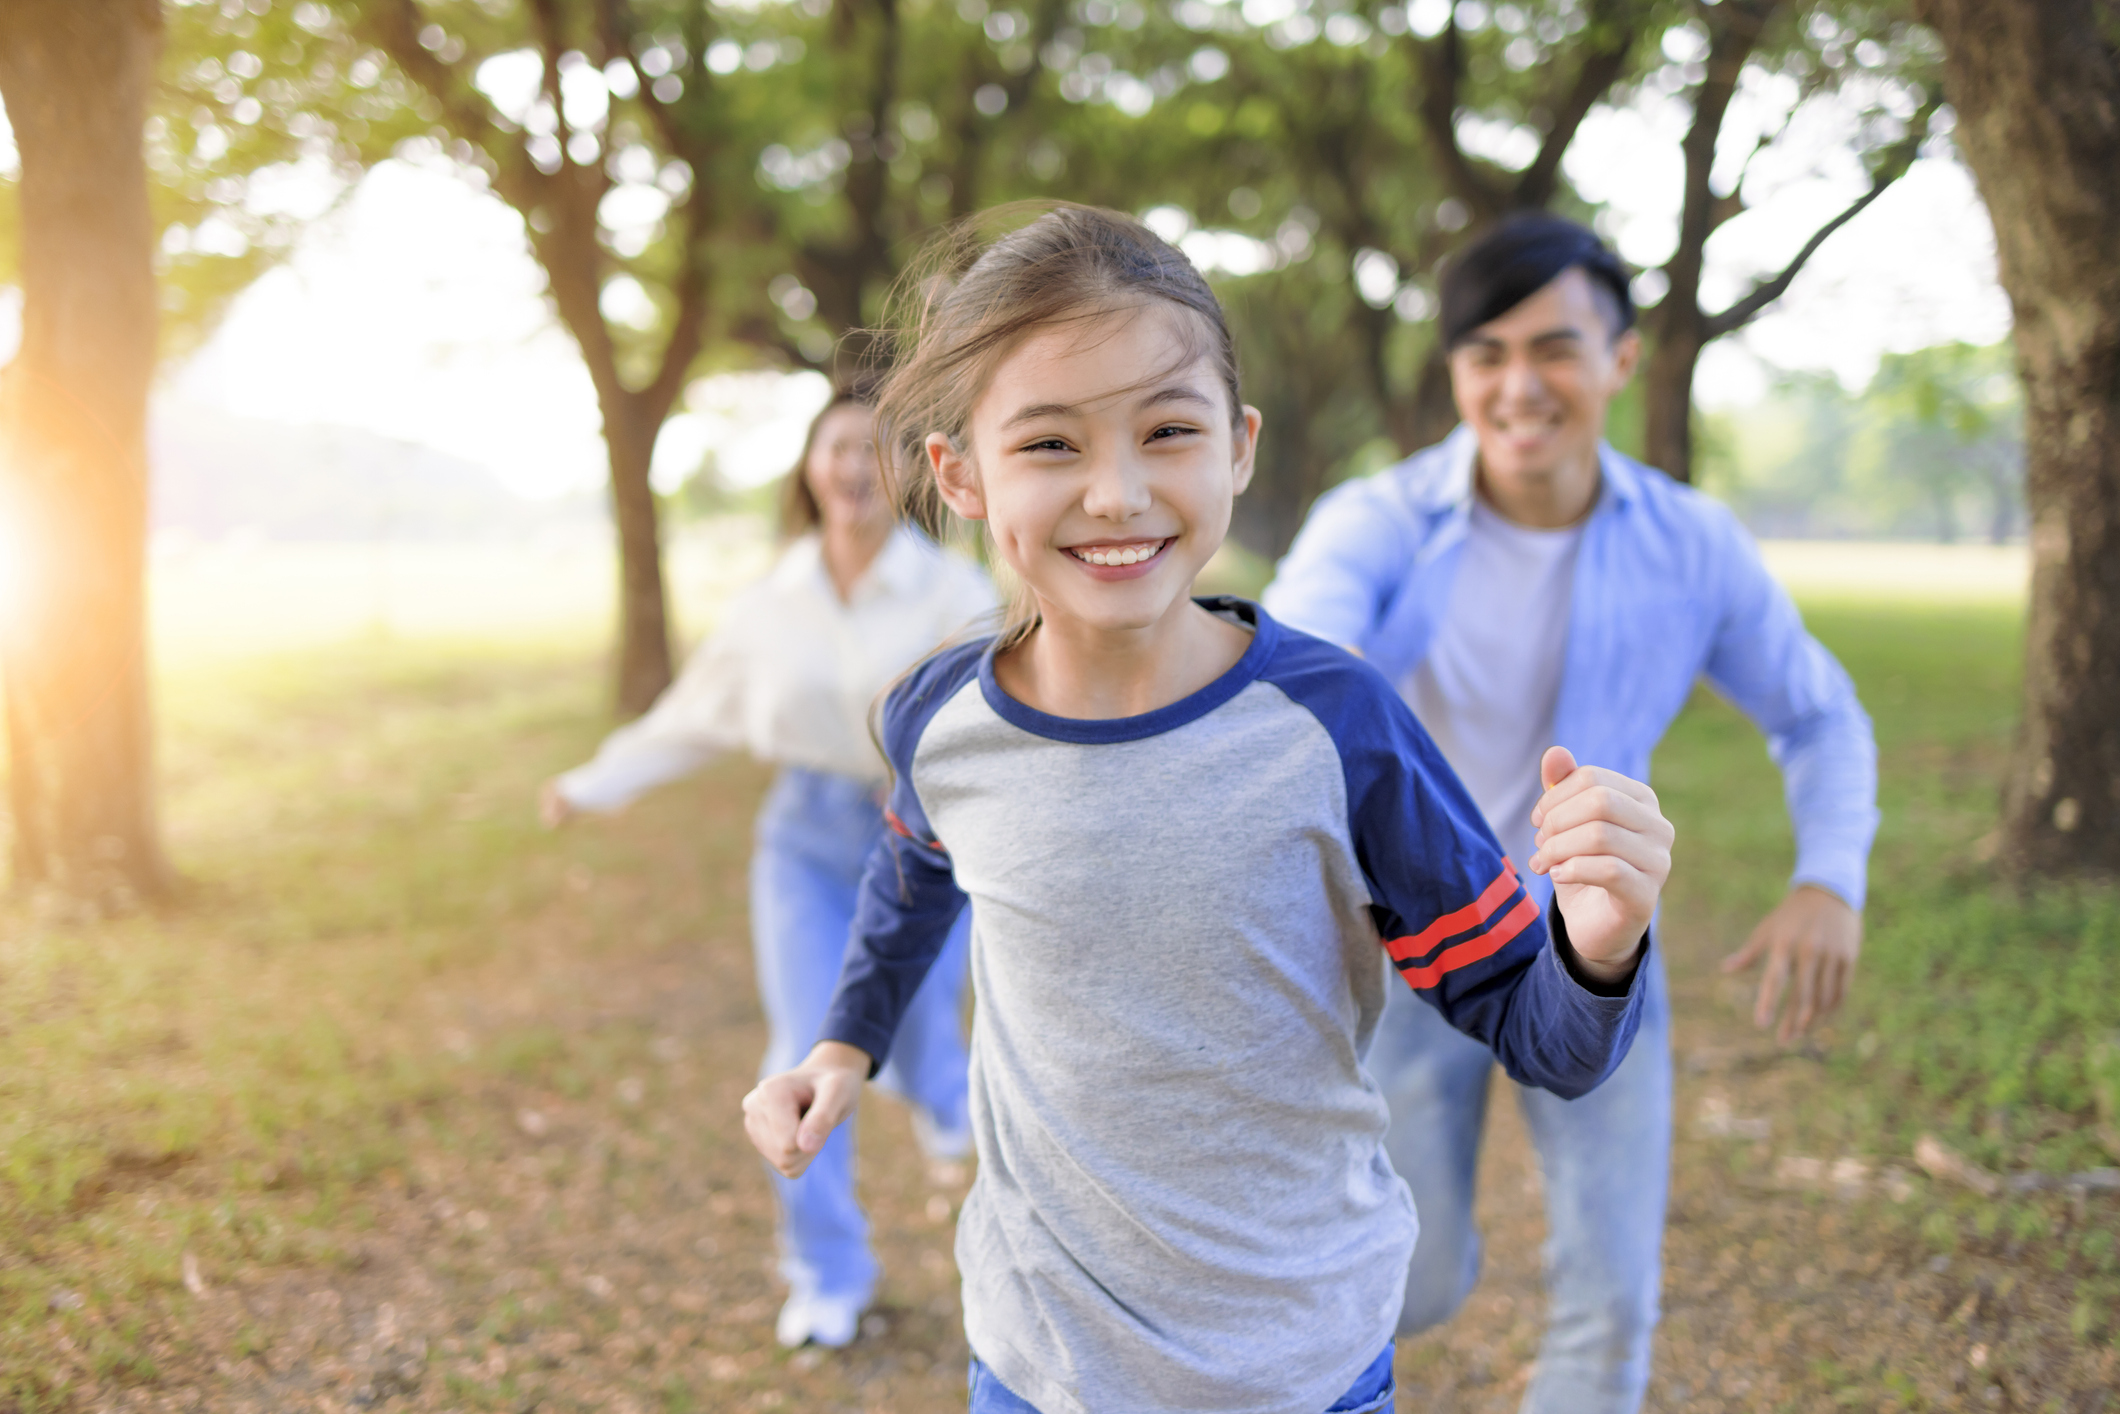 8 Family Health and Fitness Tips for 2023